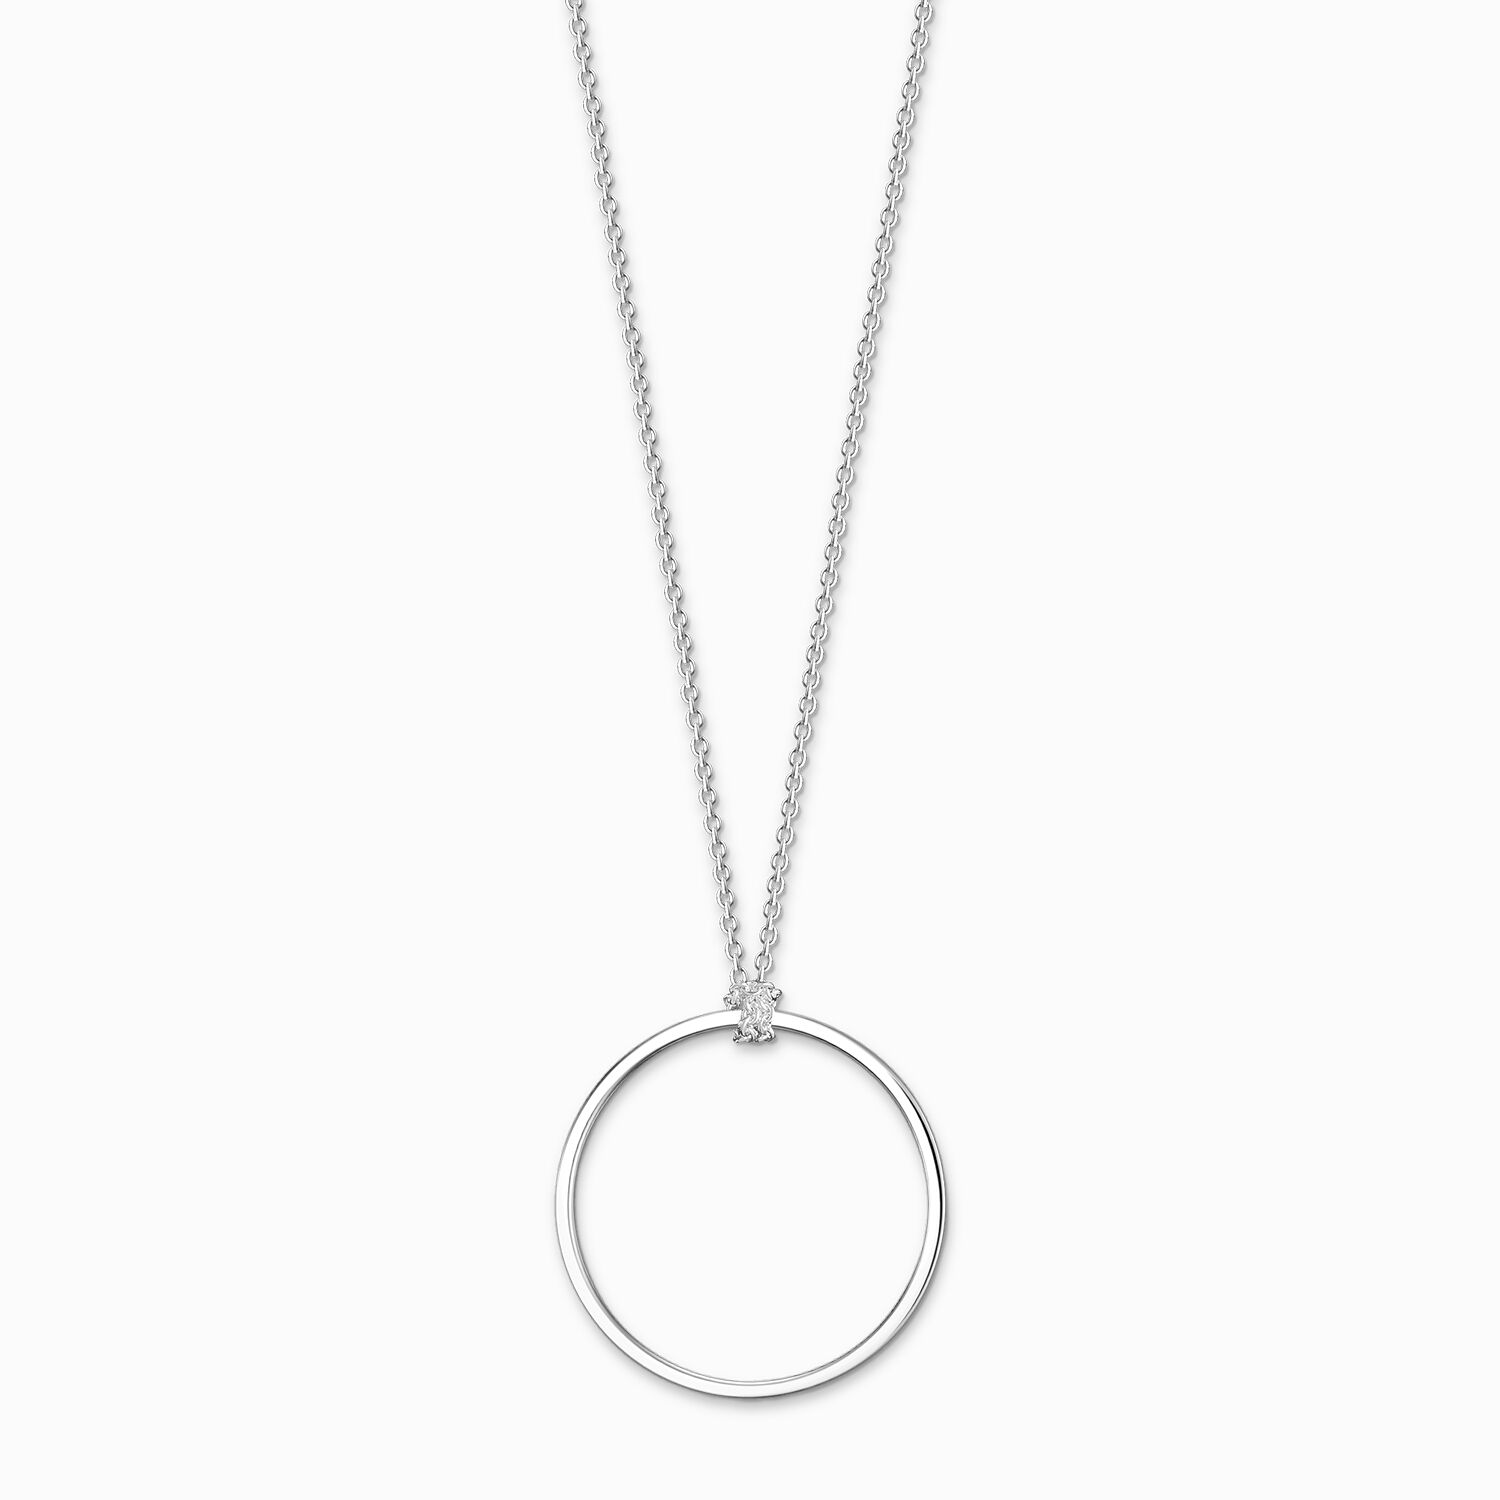 Charm necklace circle from the Charm Club collection in the THOMAS SABO online store